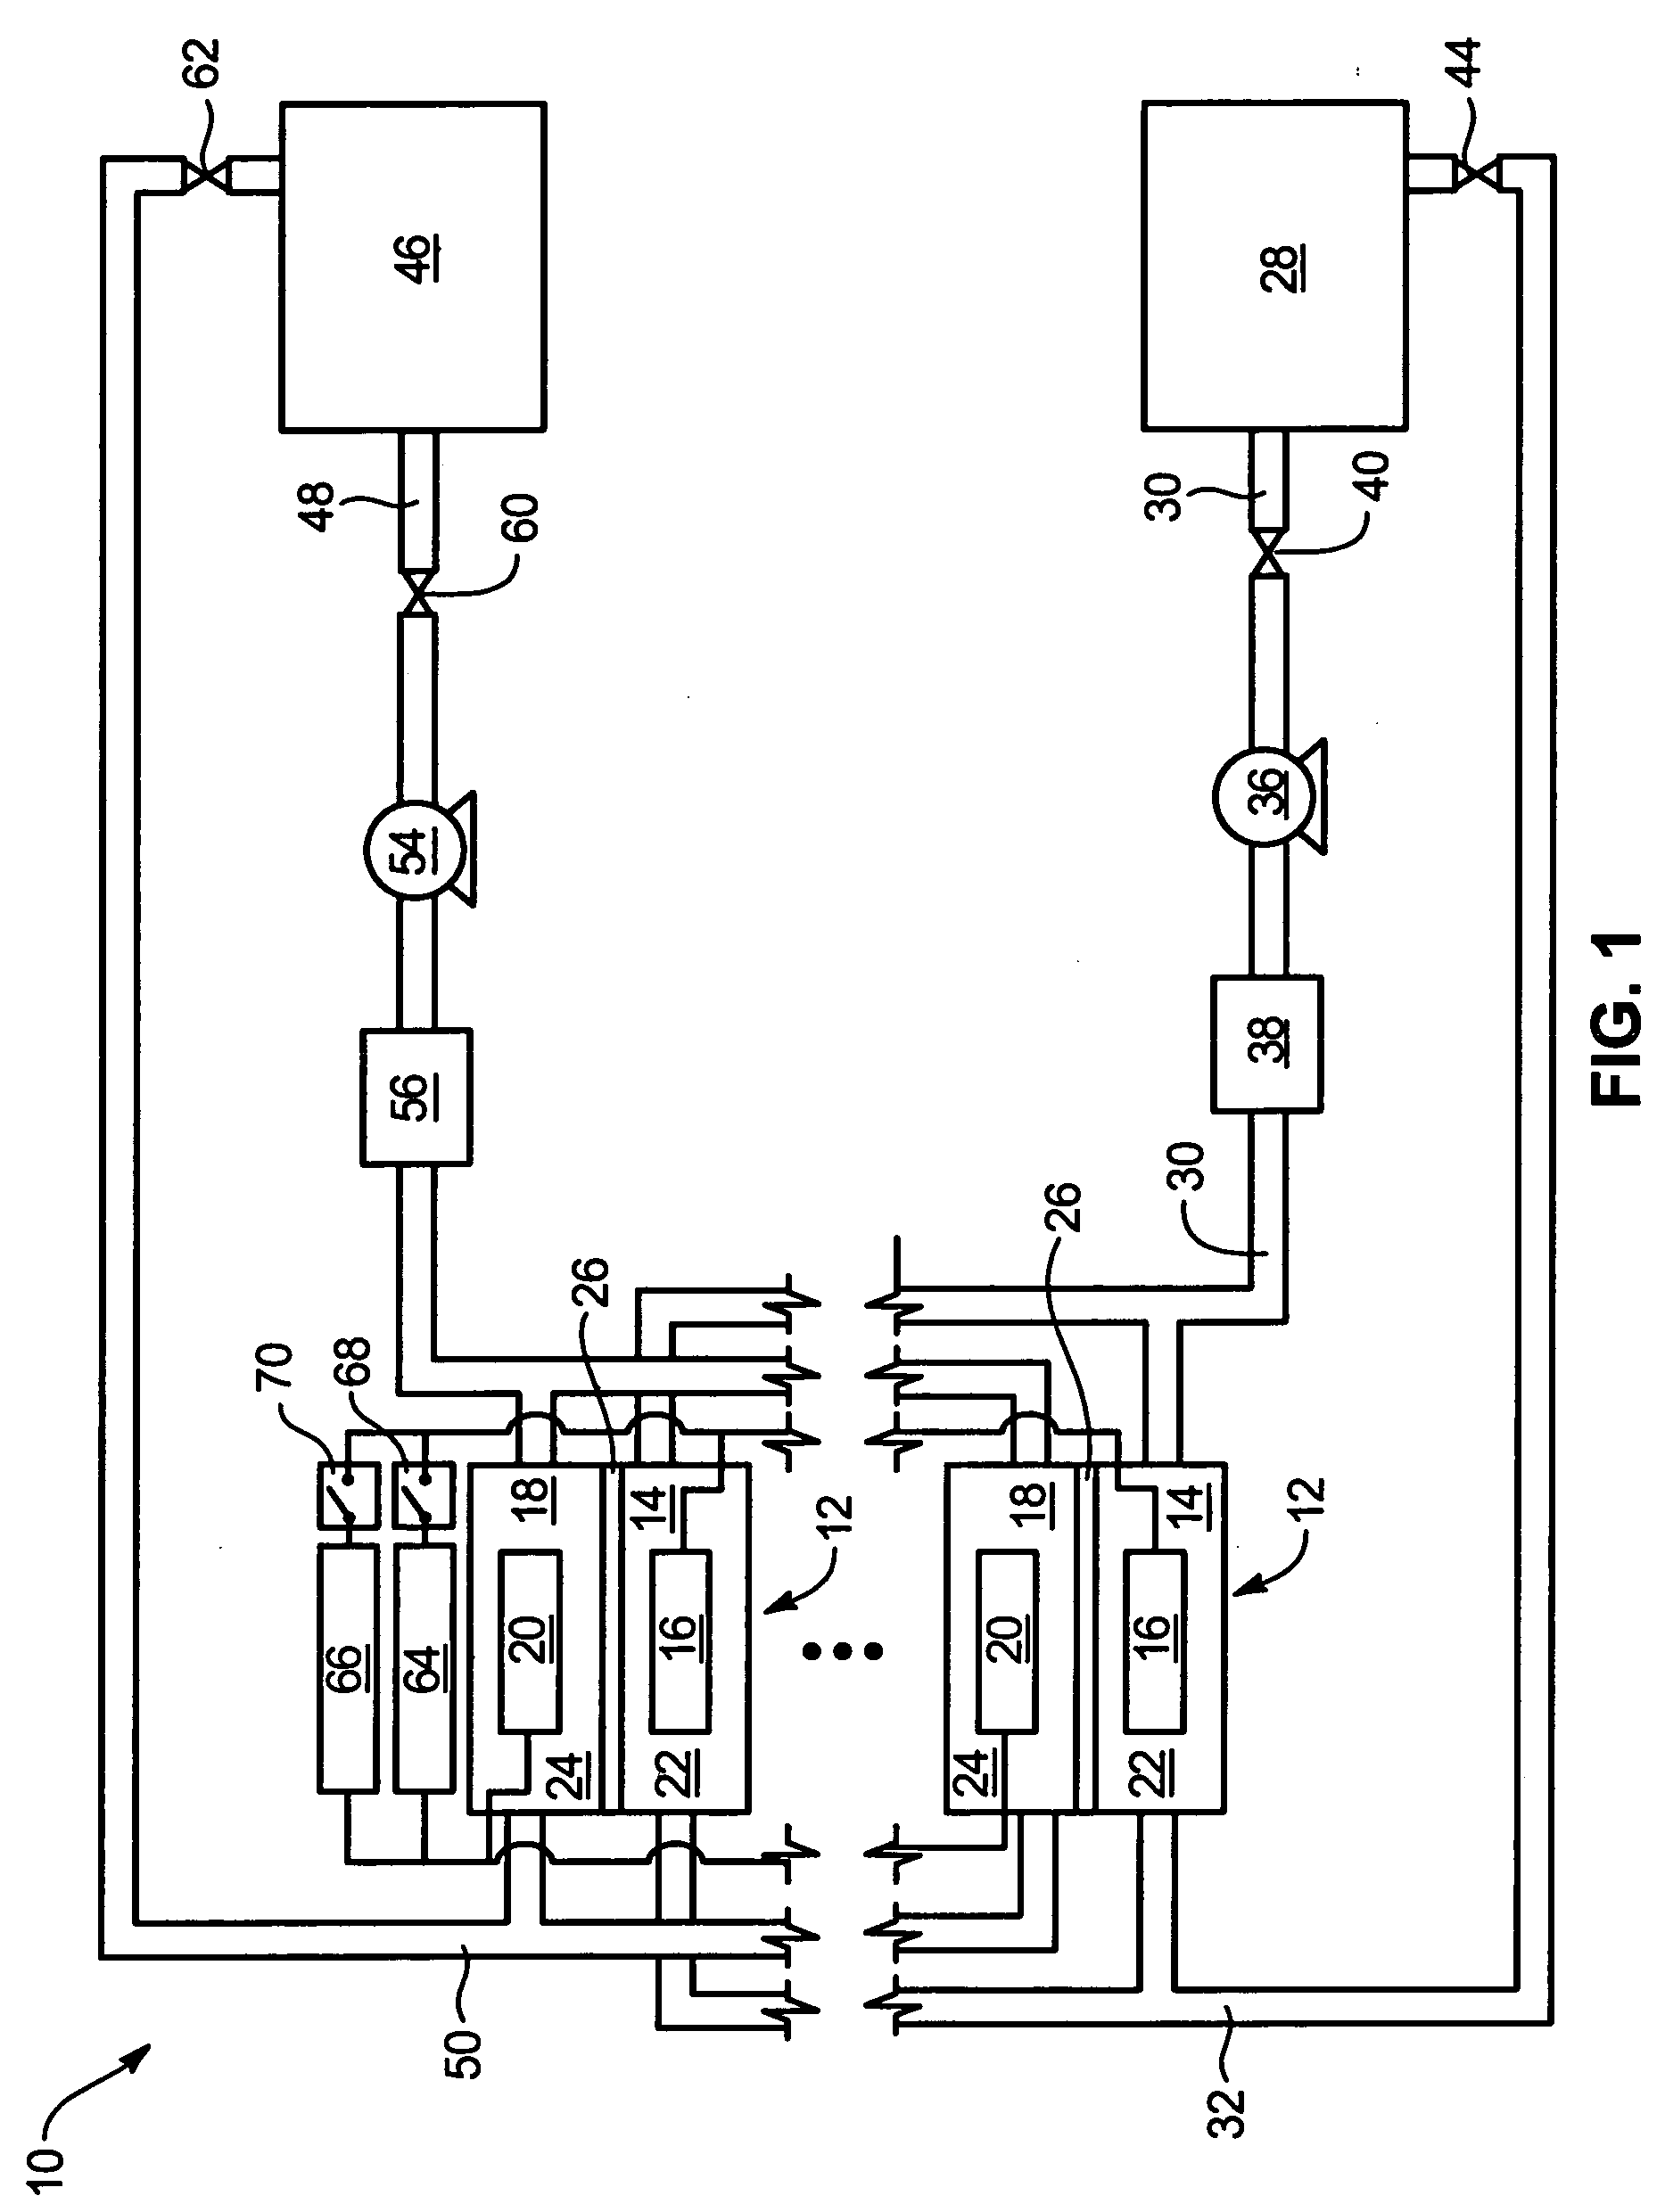 Power generation system incorporating a vanadium redox battery and a direct current wind turbine generator